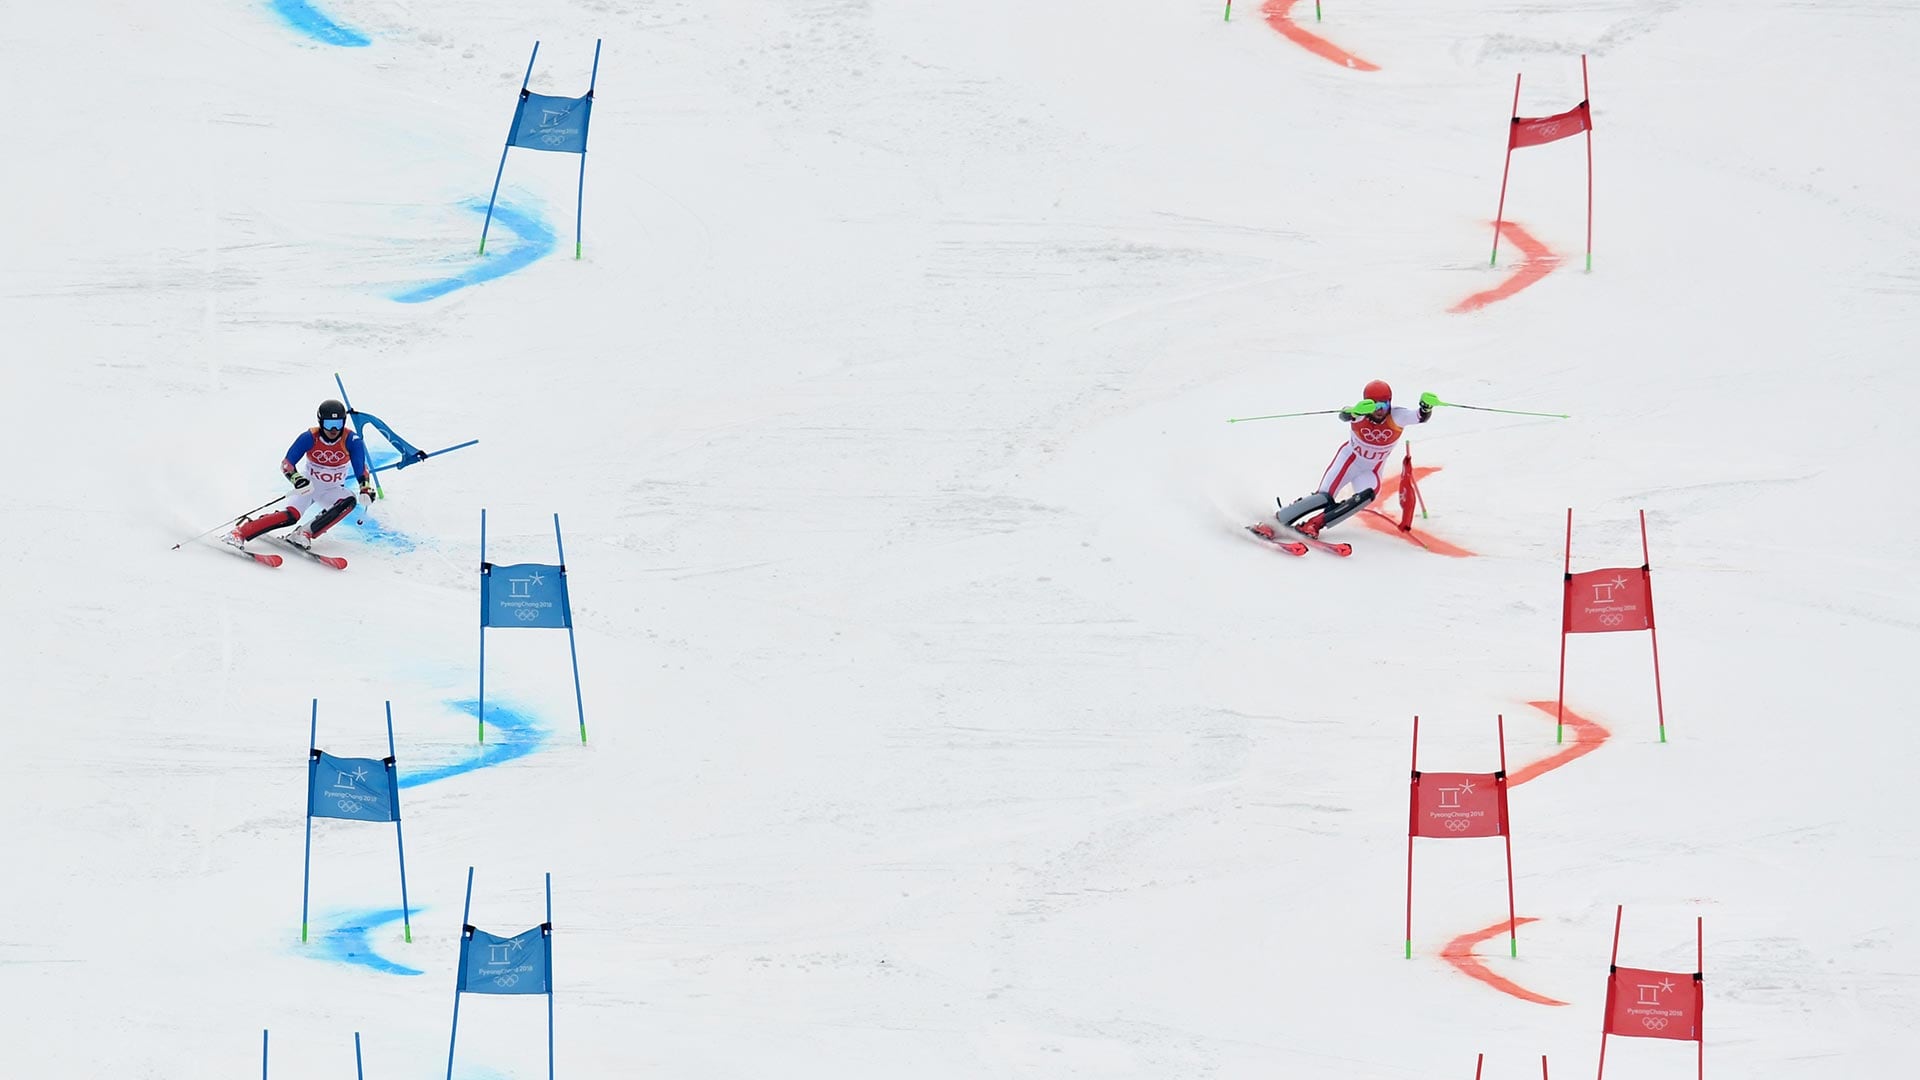 Alpine Skiing Mixed Team Event Rules, How to Watch, Live Updates